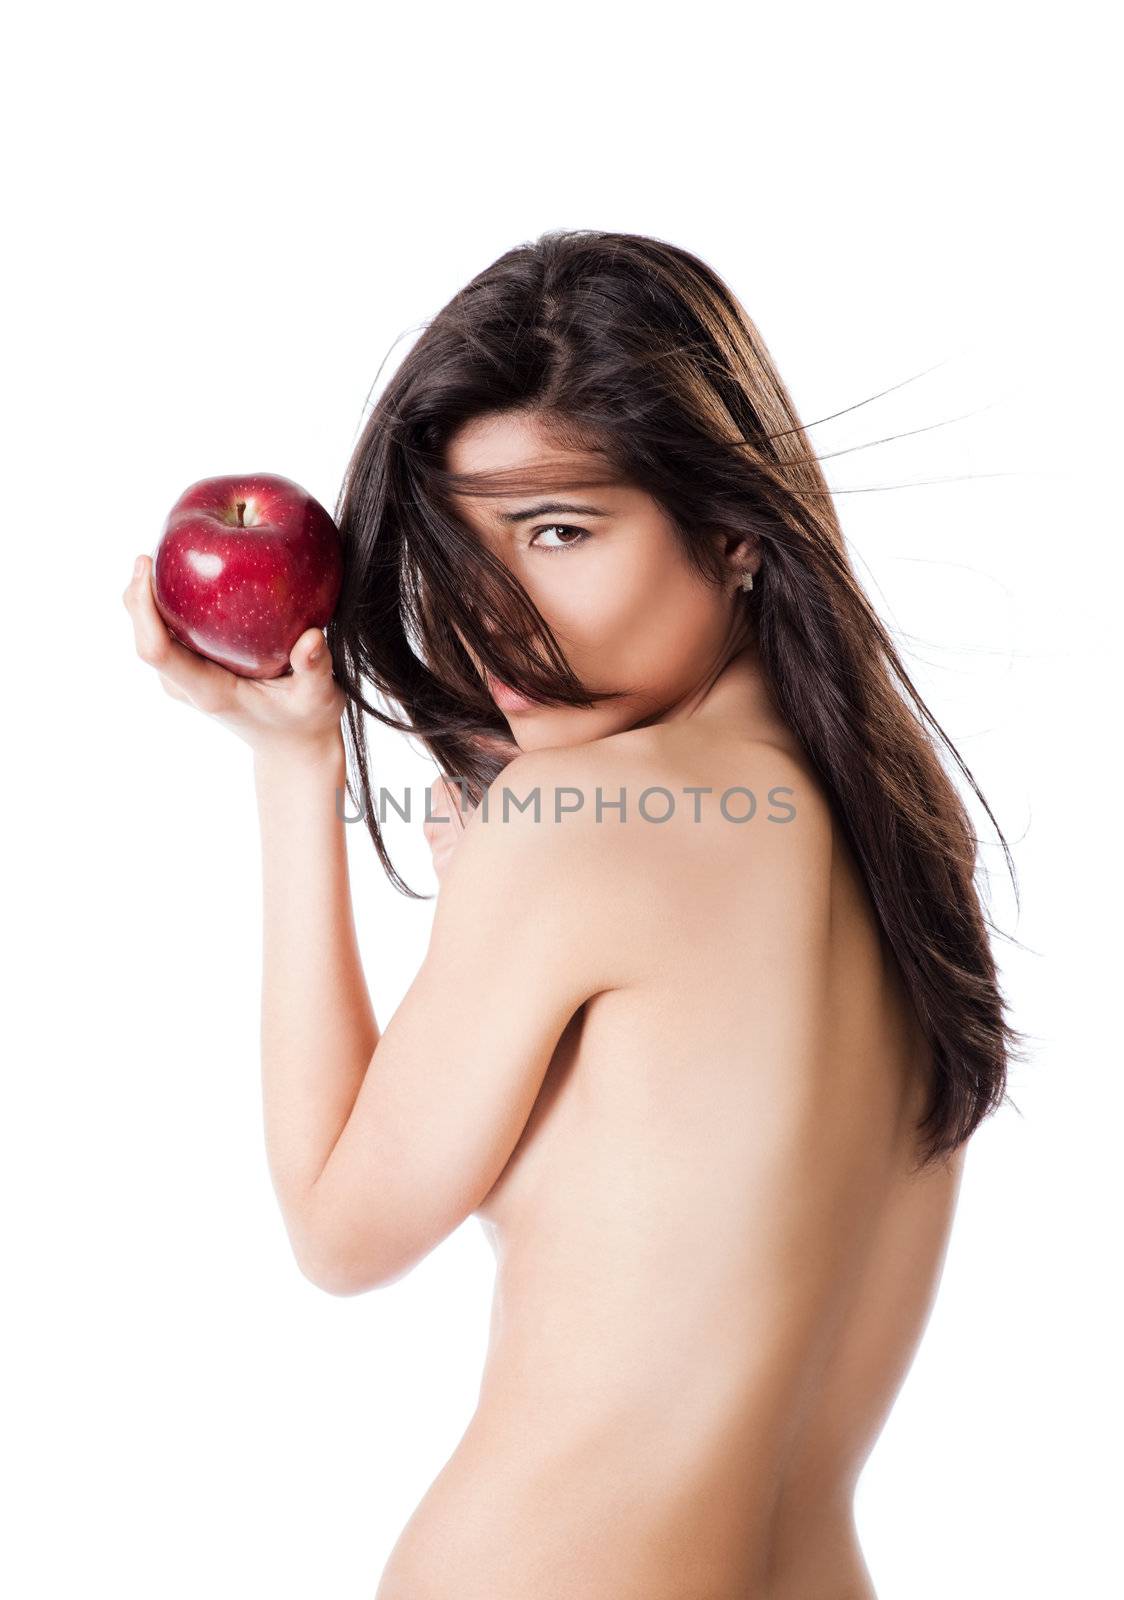 Beautiful topless female holding red apple in hand, looking at camera